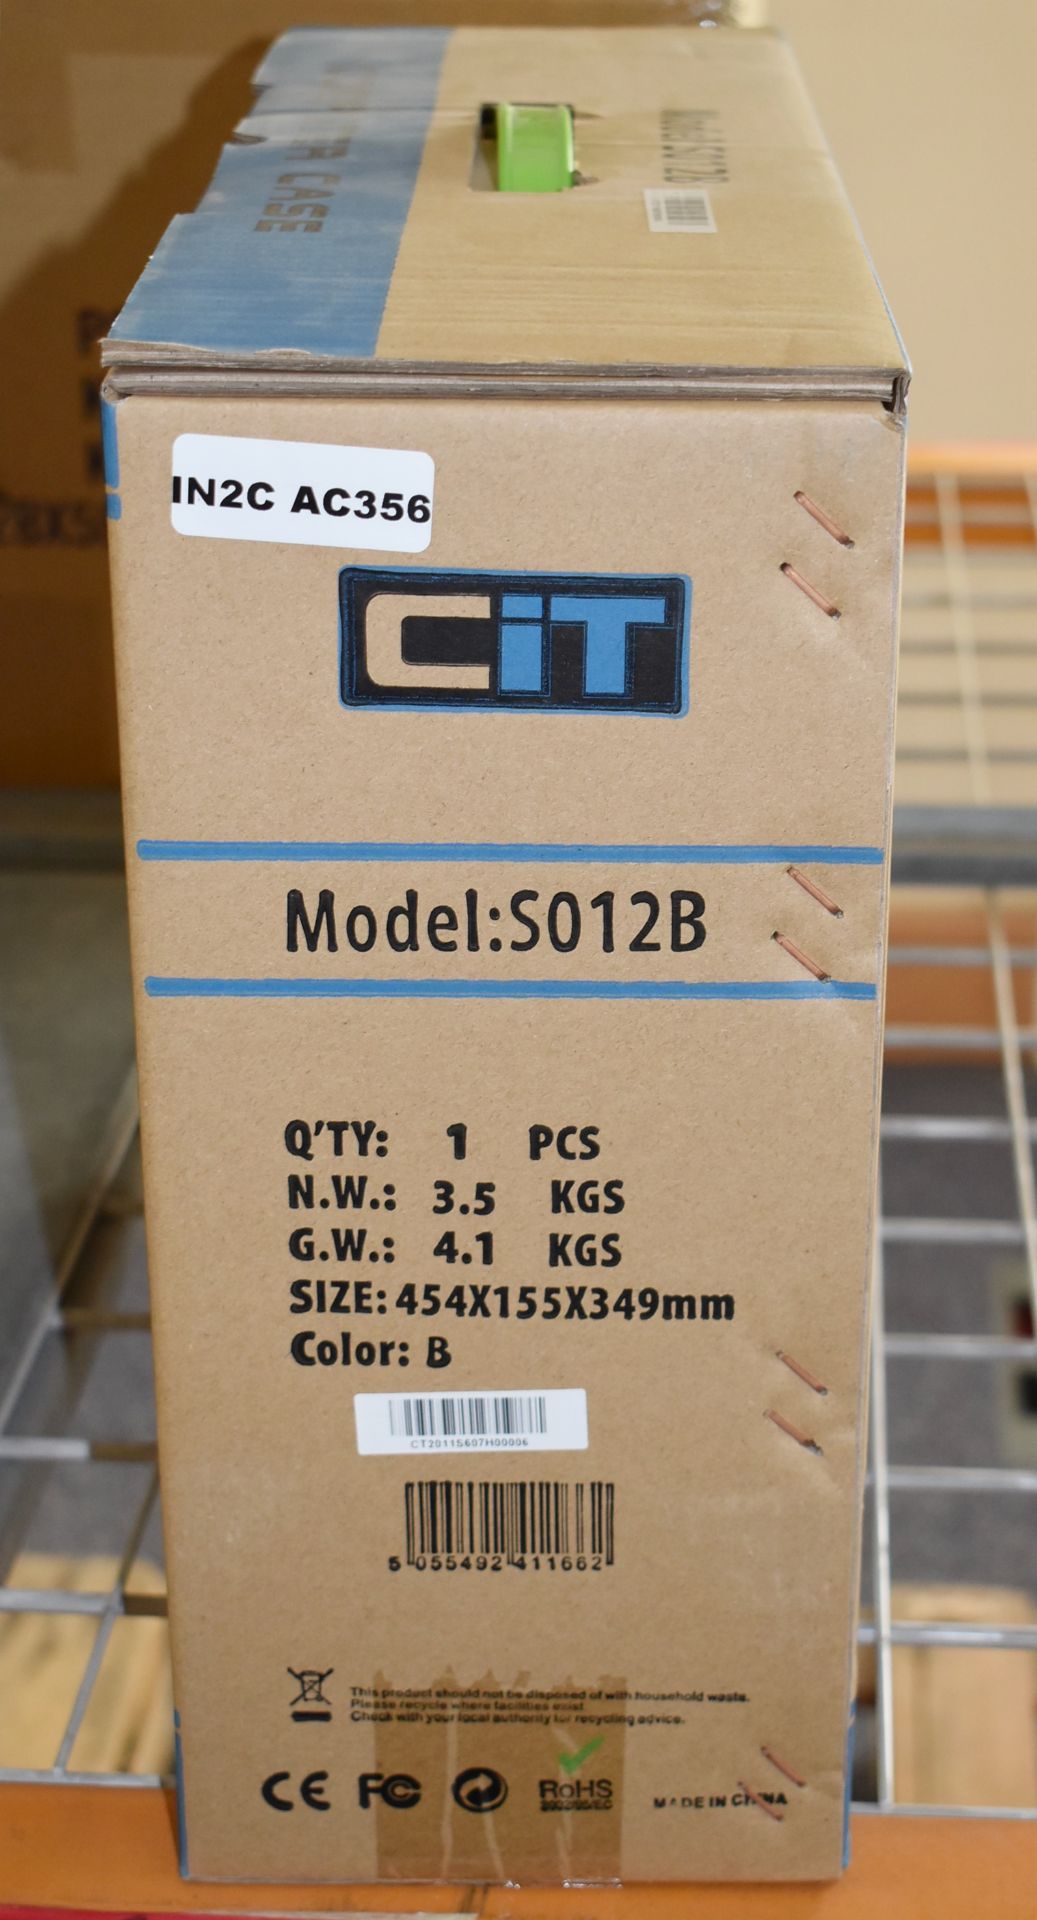 1 x CIT Small Form Factor PC Case With 300w Power Supply - New Boxed Stock - Image 3 of 3